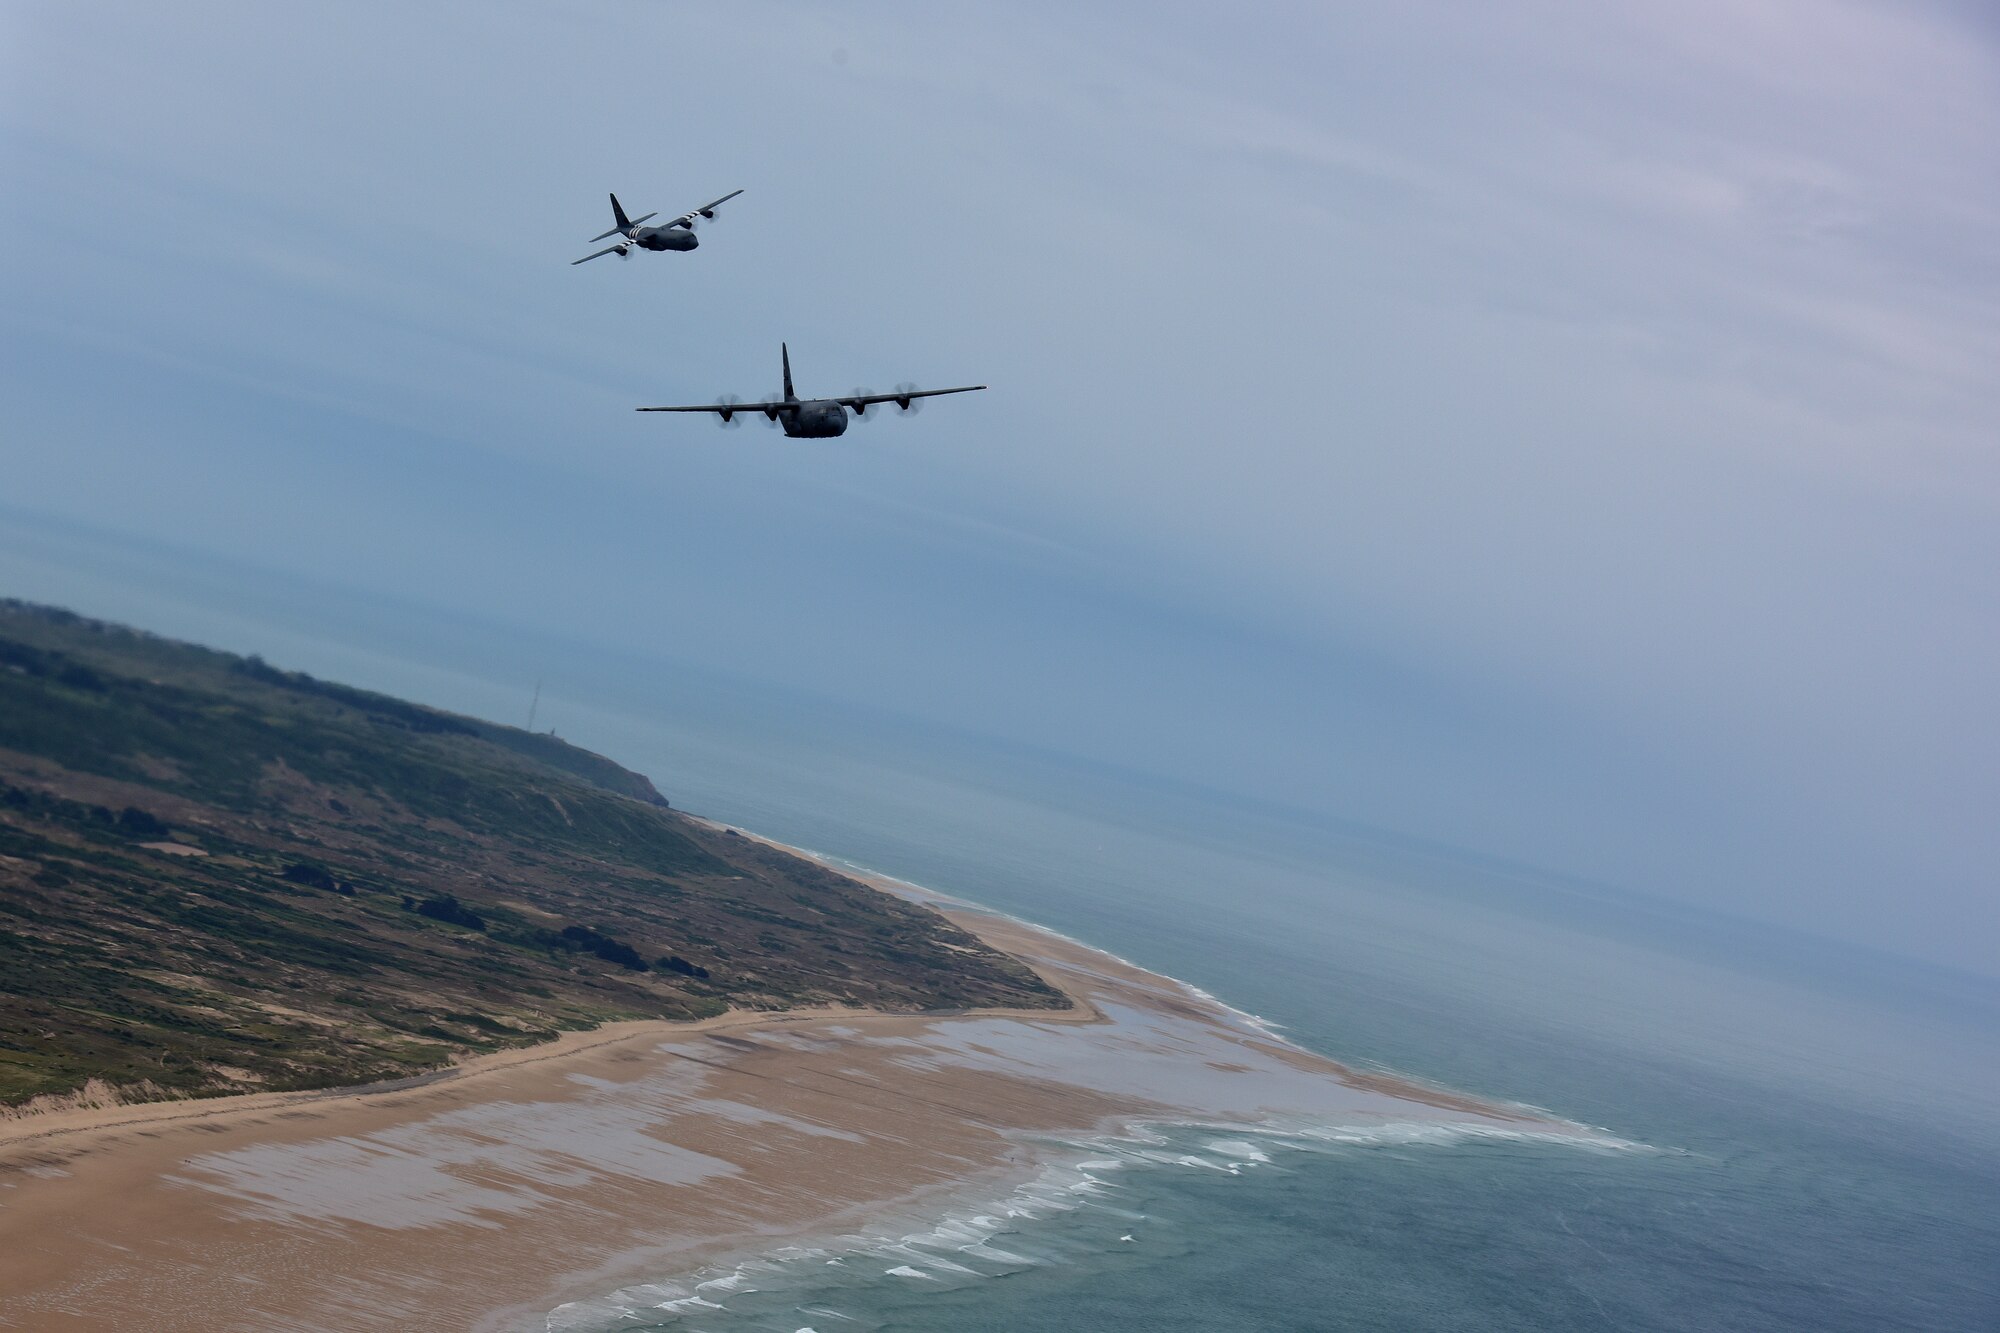 Two C-130s fly in the air over the beaches of Normandy